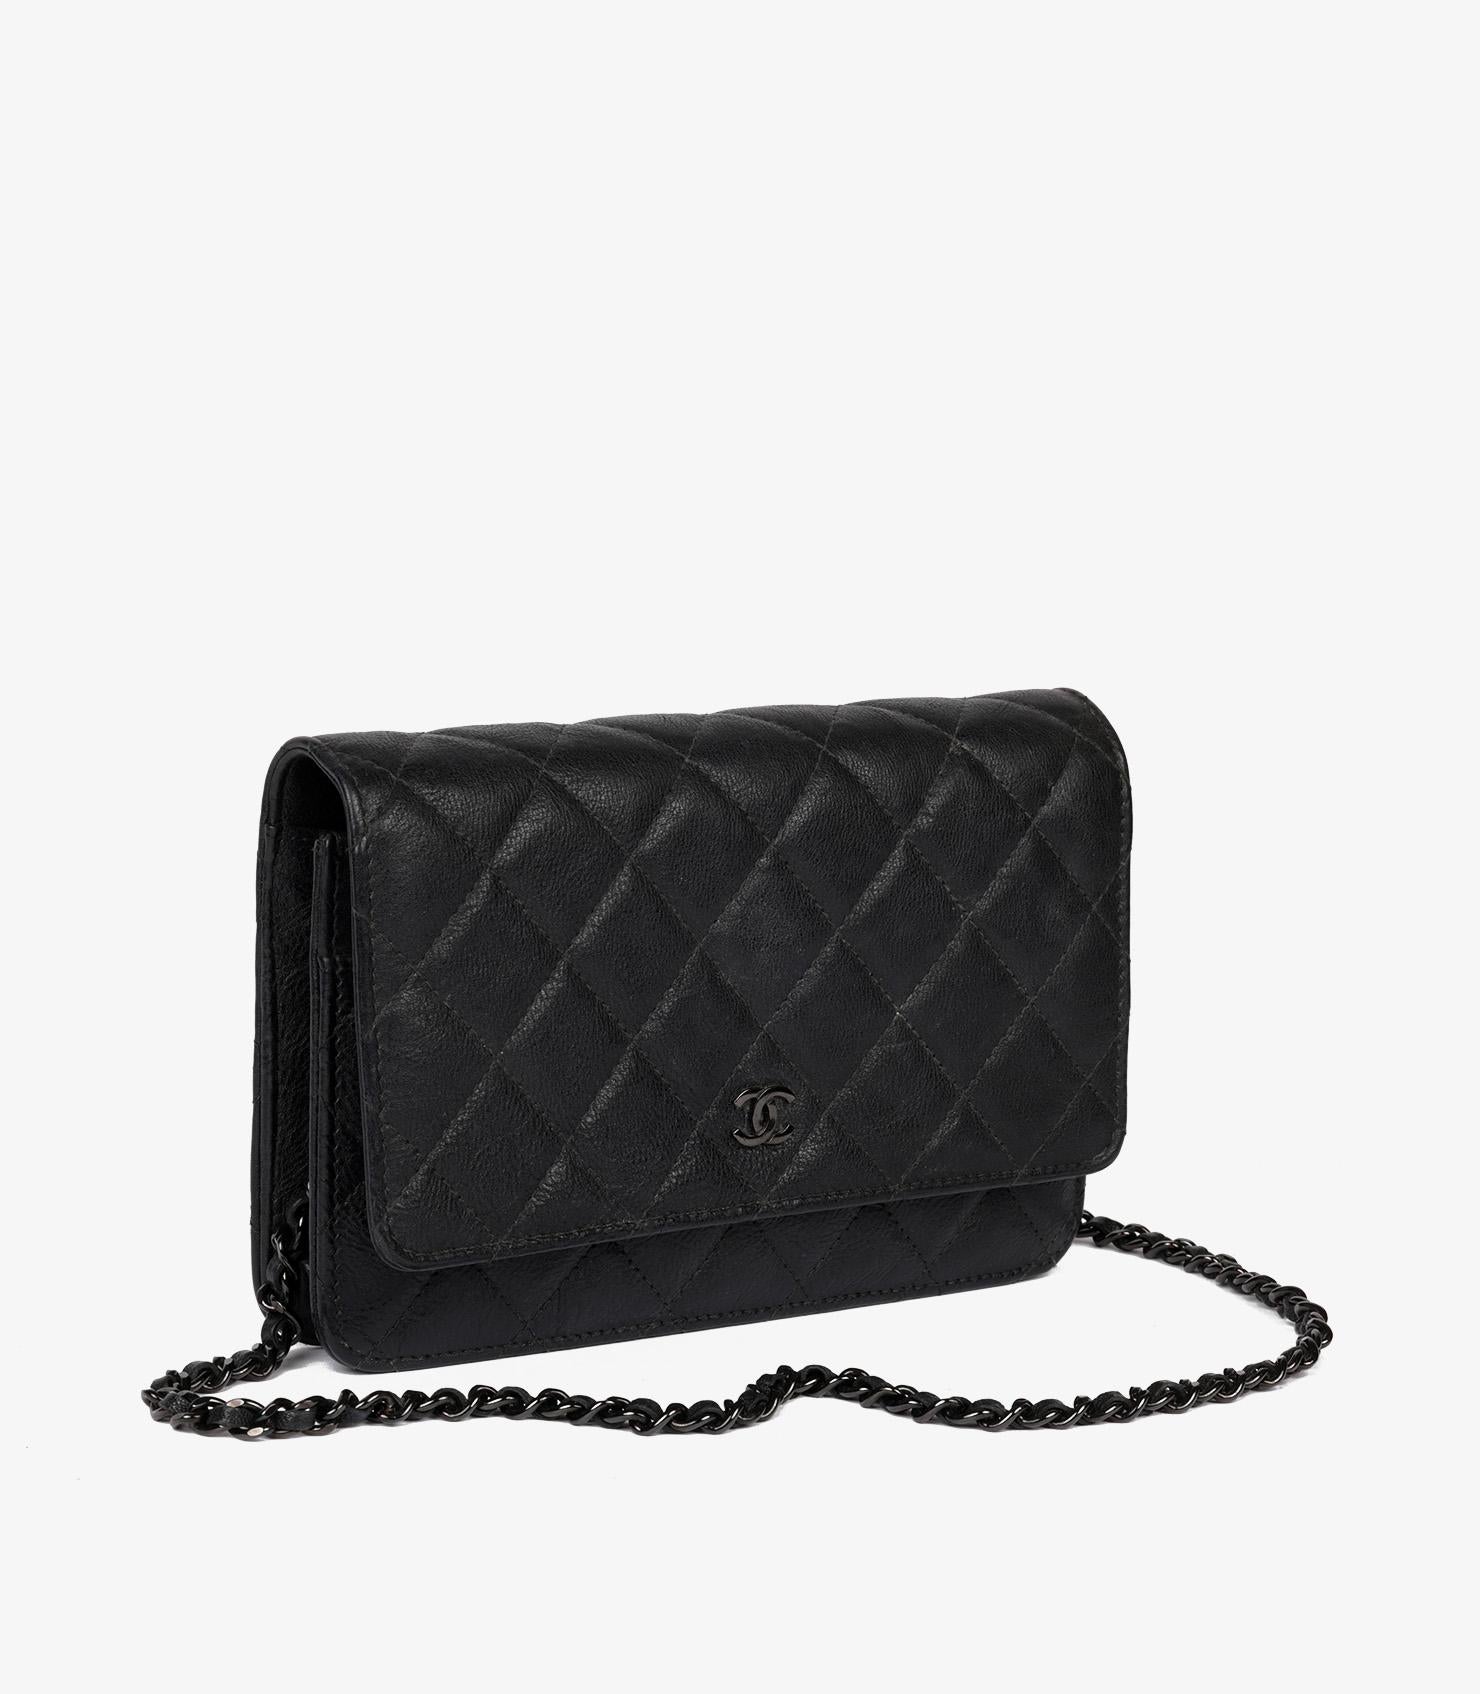 Chanel Black Quilted Crumpled Calfskin Leather SO Black Wallet-On-Chain WOC In Excellent Condition For Sale In Bishop's Stortford, Hertfordshire